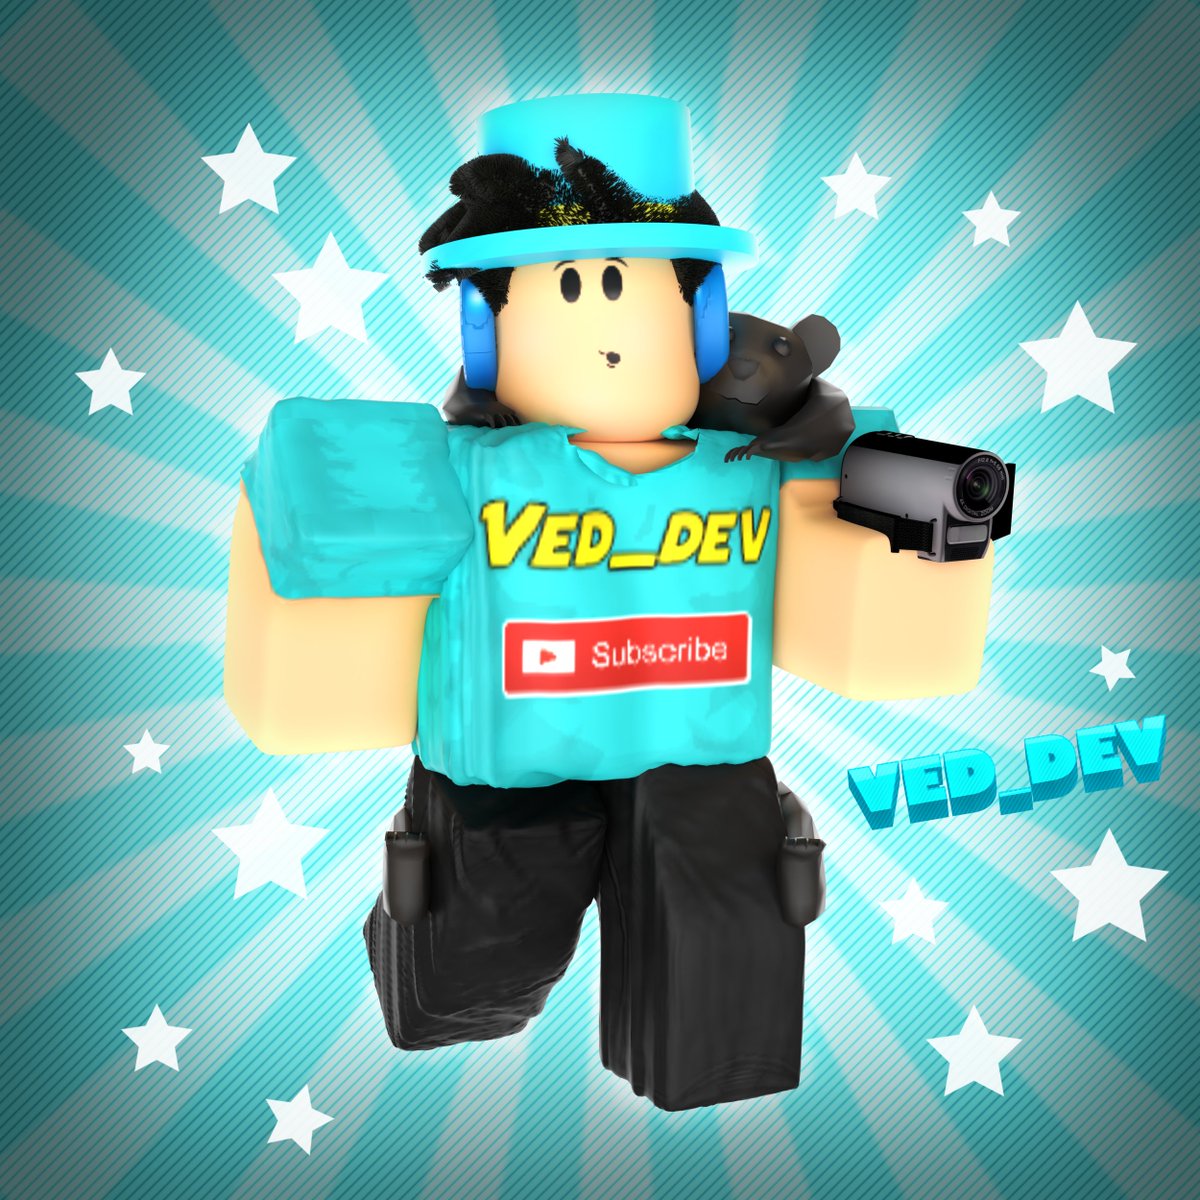 Blondy On Twitter So A Made A Fan Gfx For At Veddev - veddev use code veddev on twitter roblox in 2020